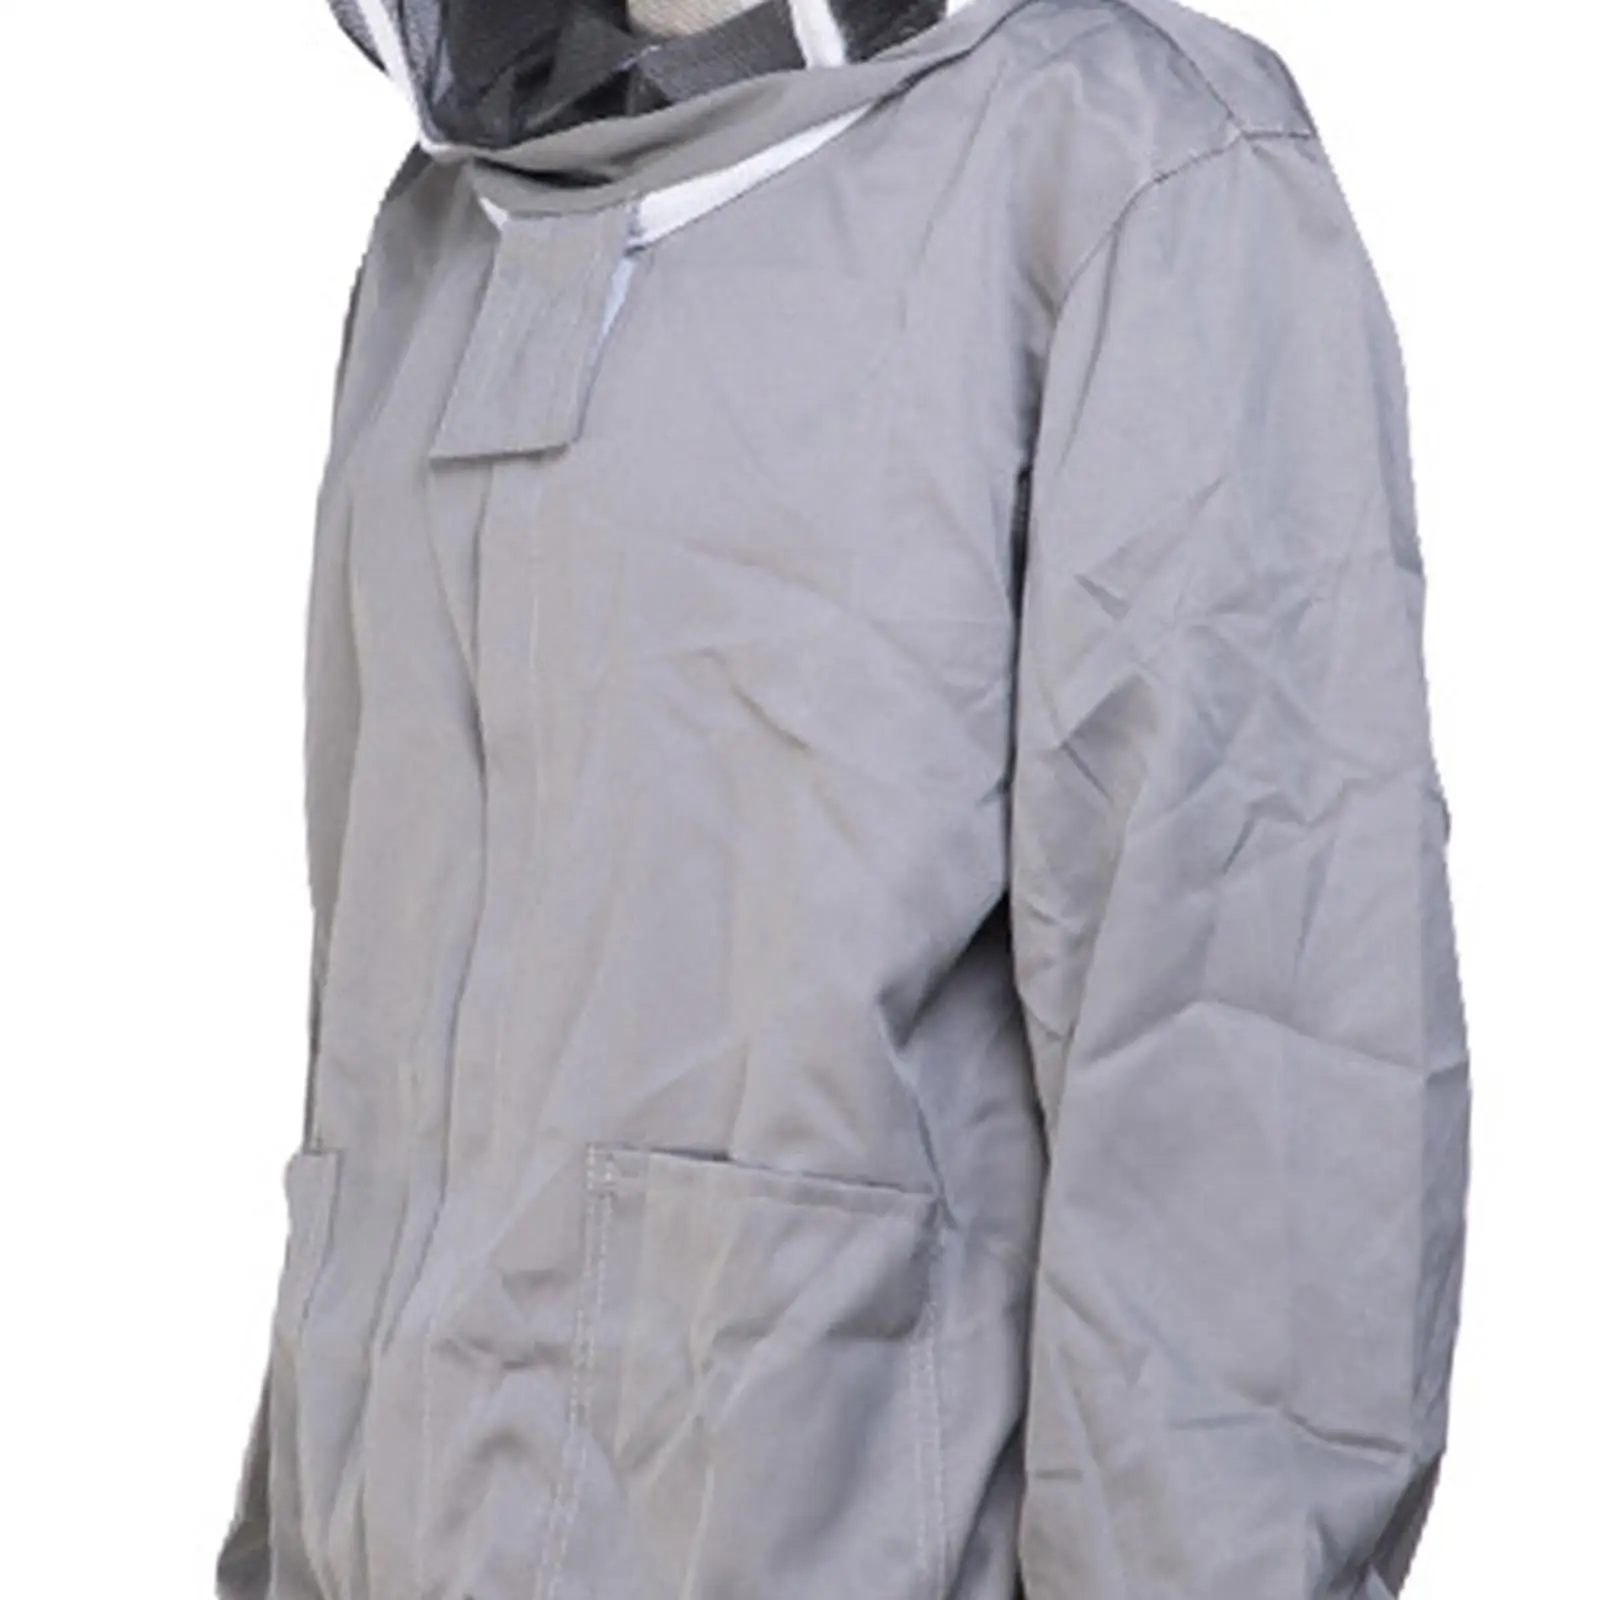 Beekeeper Jacket Breathable Professional with Fencing Veil Hood Premium with Pockets Farm Keeping Smock Suit for Beginners